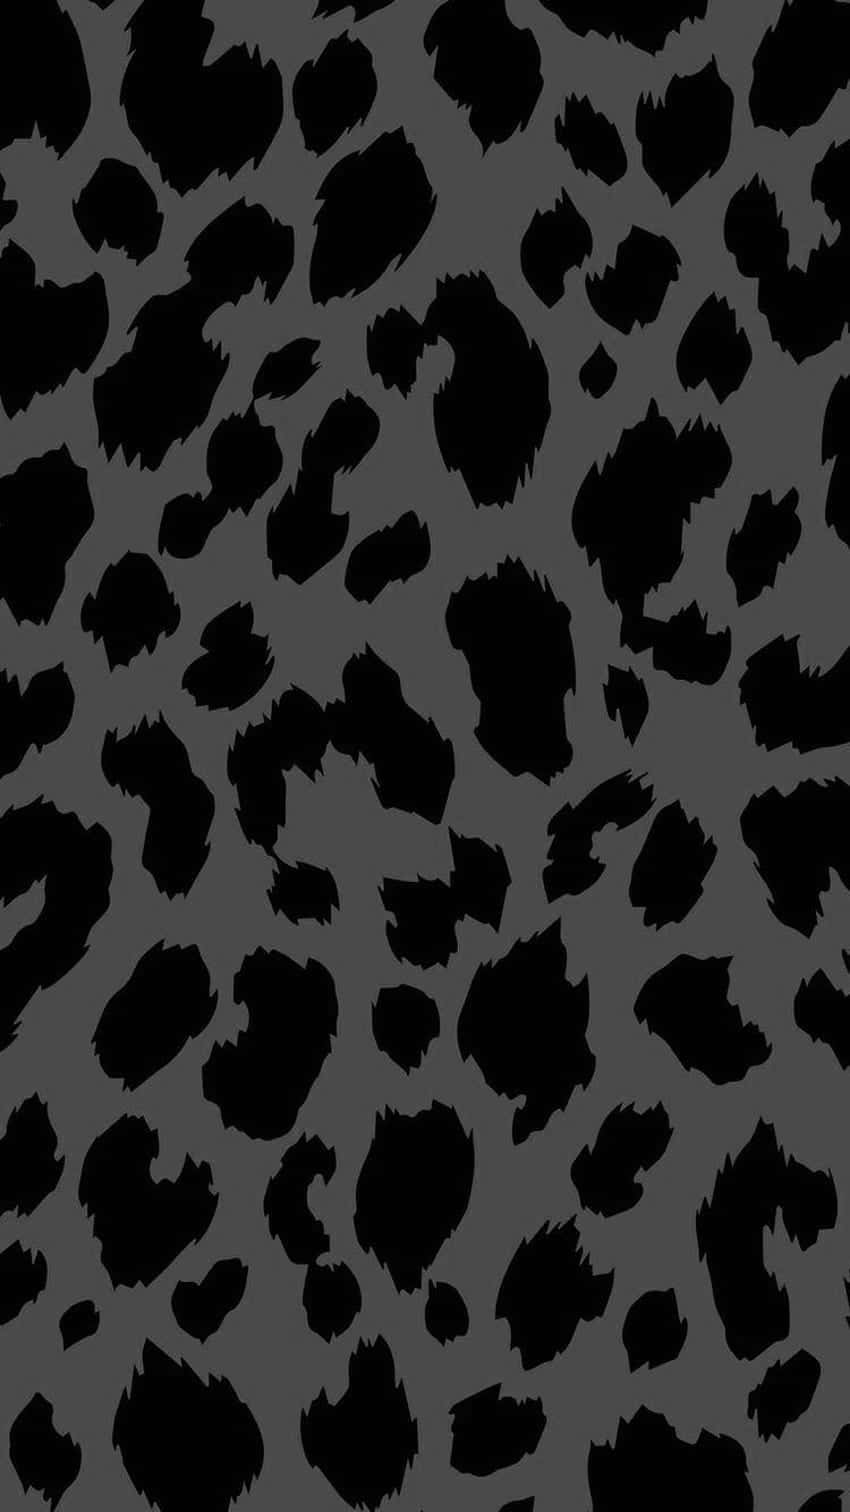 Decorate your phone with a fashionable animal print Wallpaper